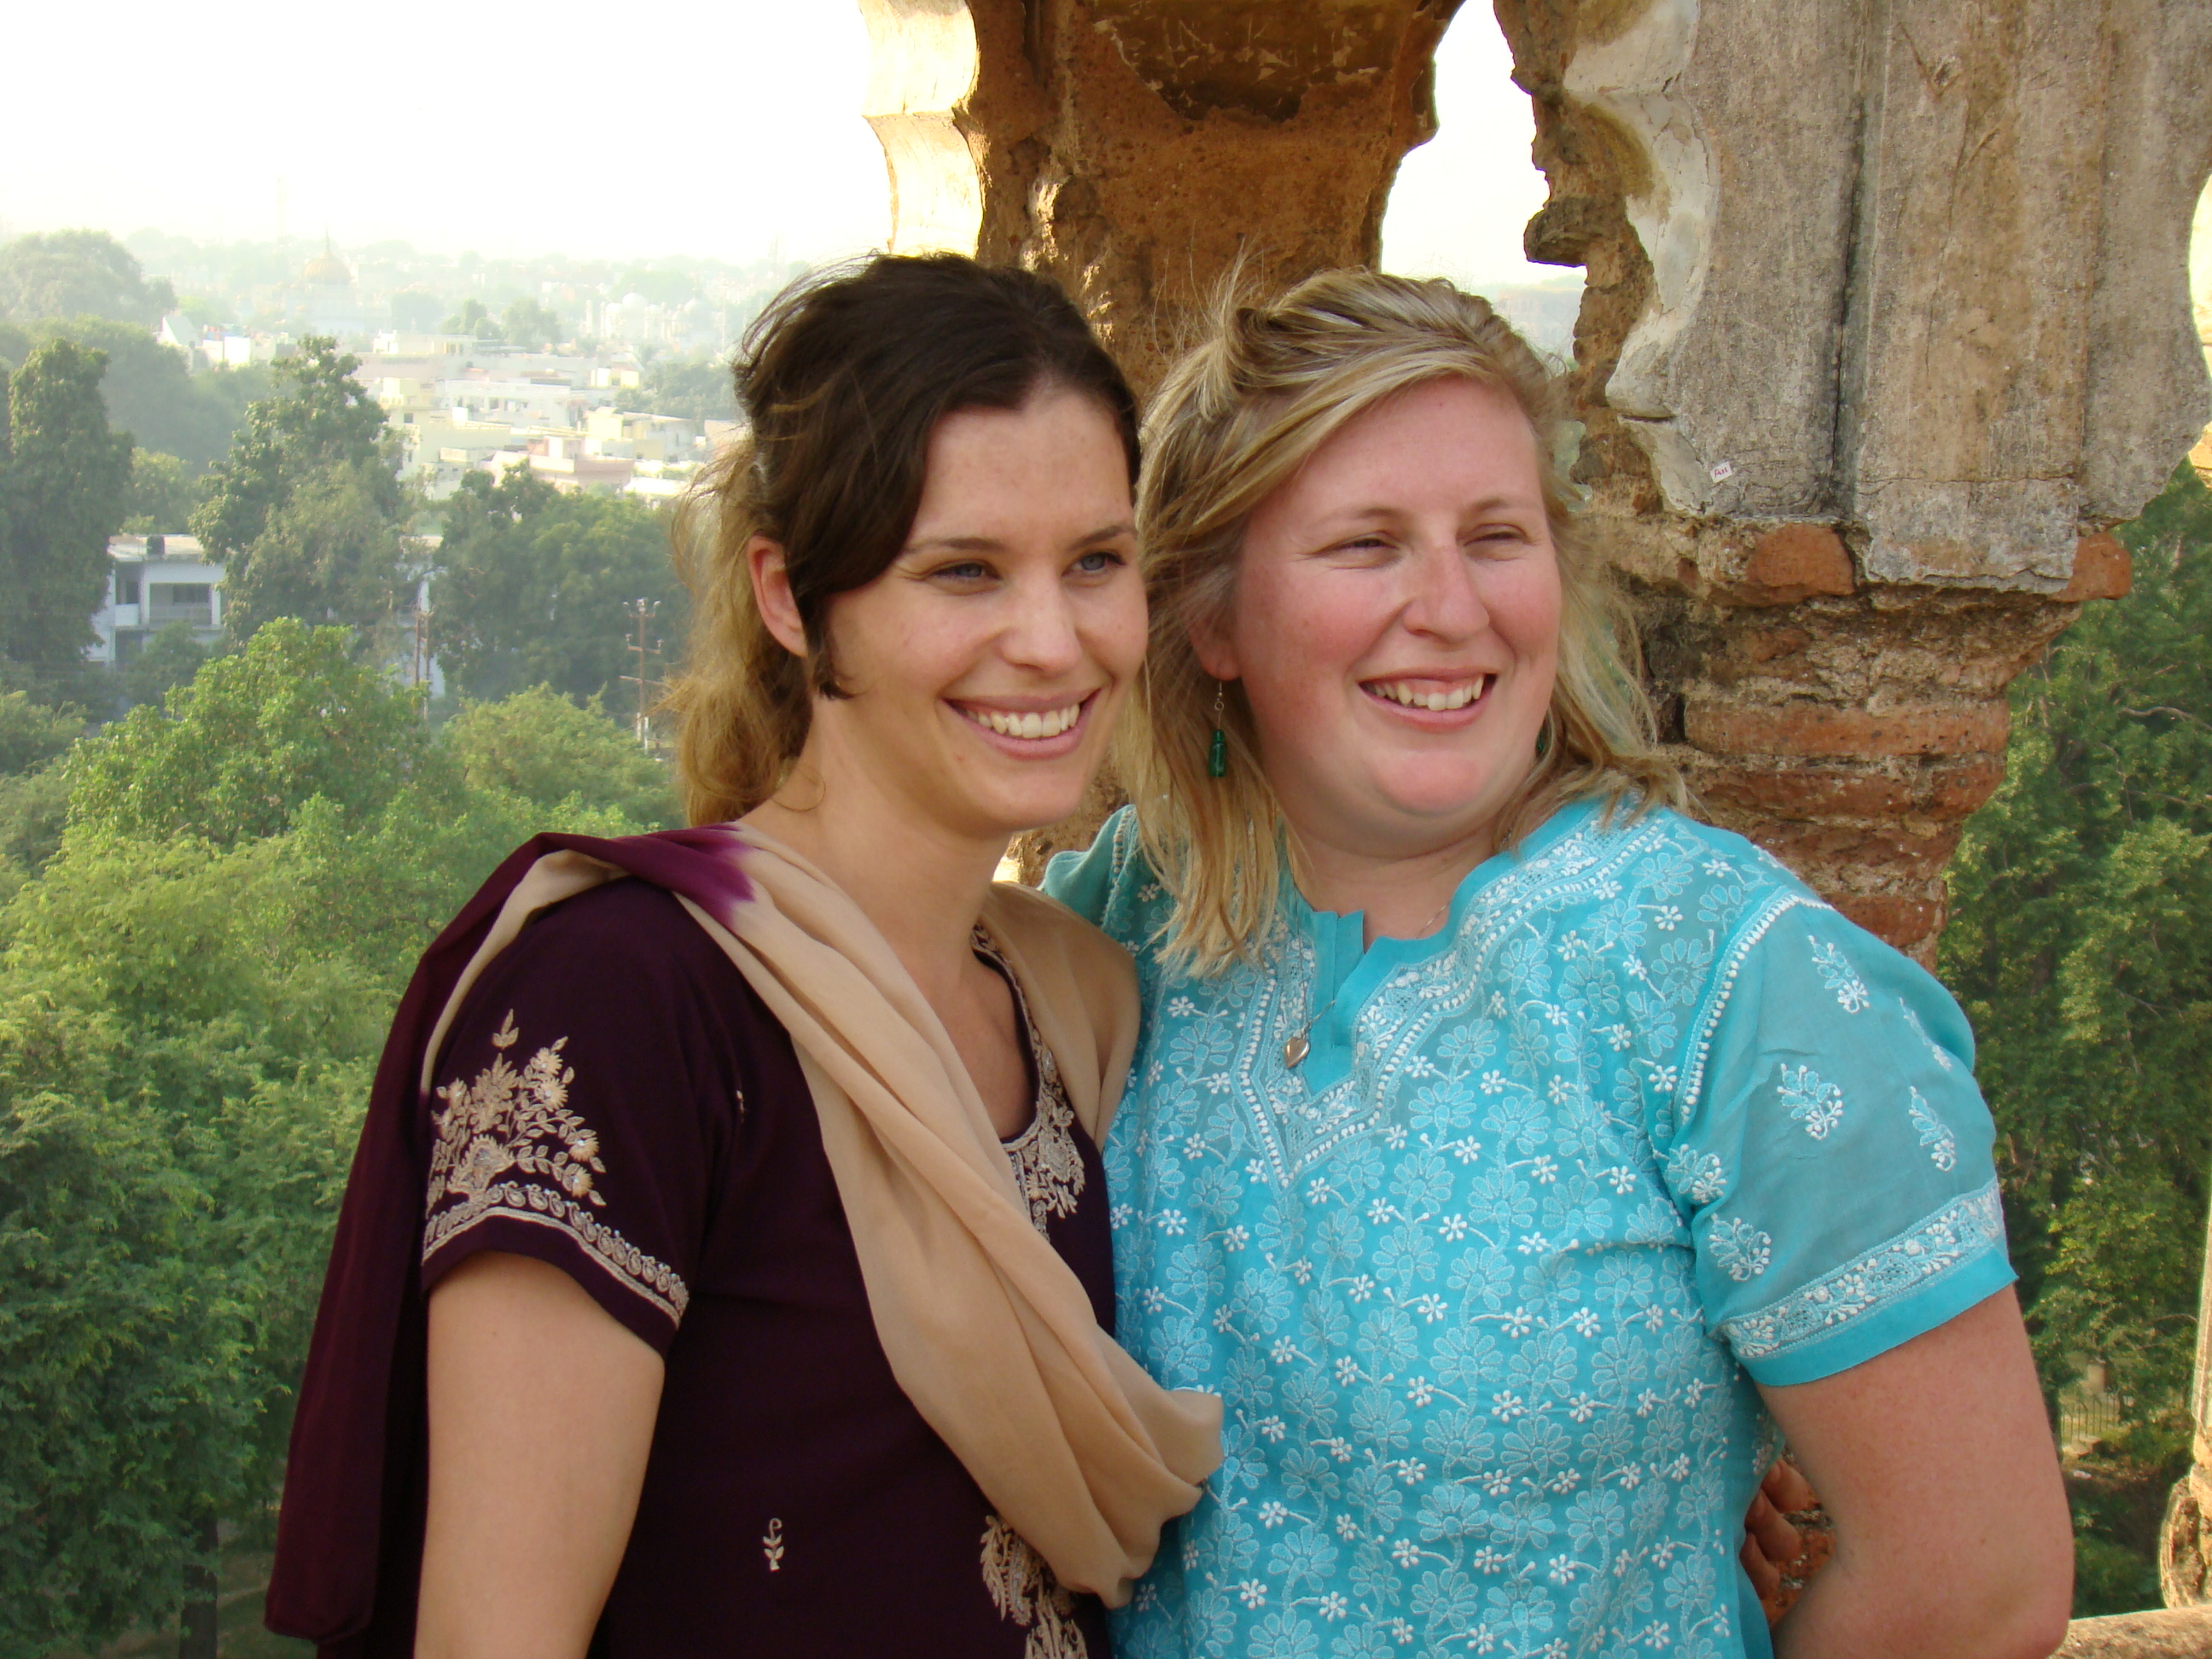 Nathalie on an Opportunity insight trip to India